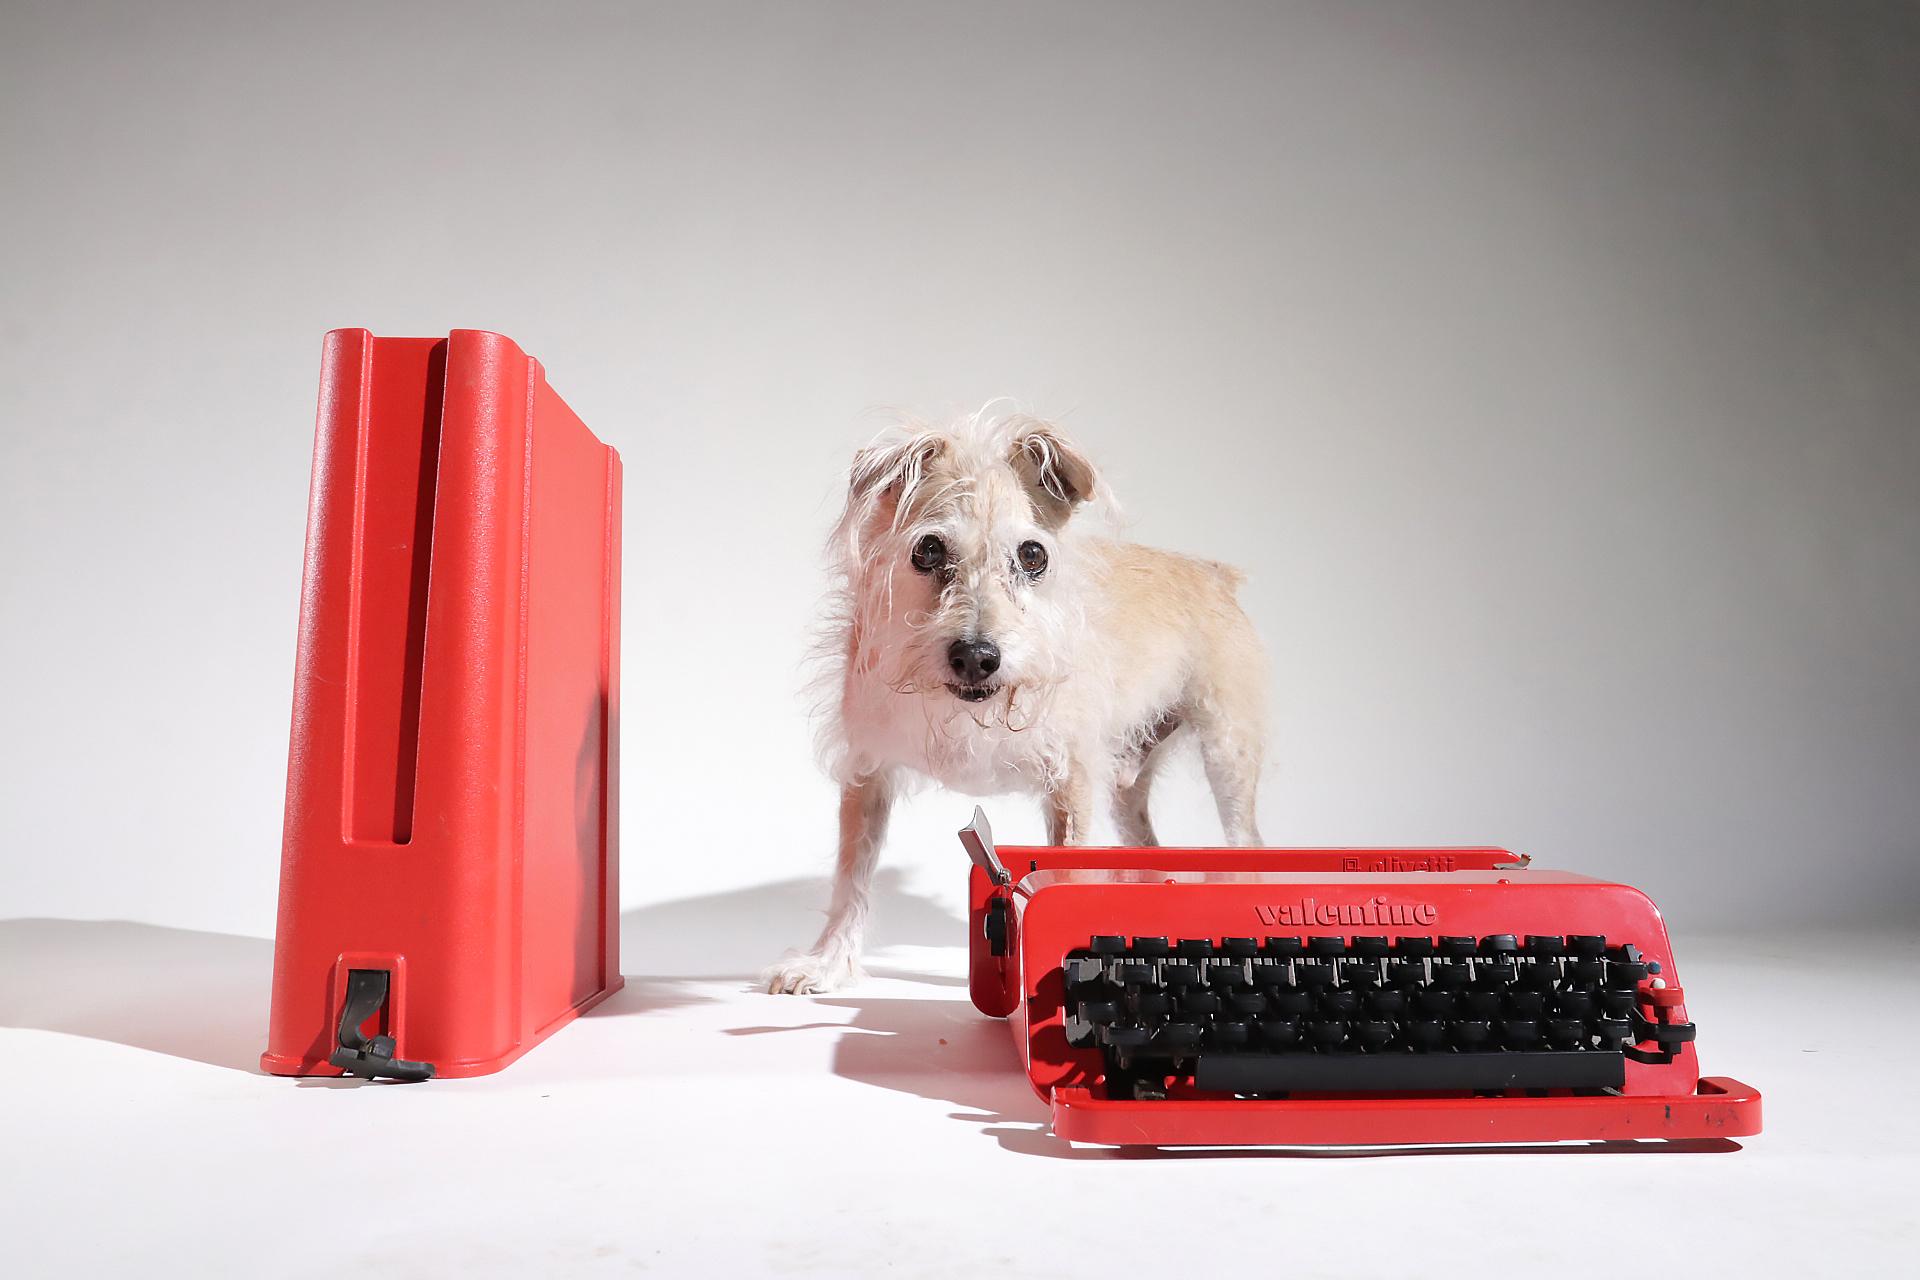 Olivetti valentine typewriter designed by Ettore Sottsass & Perry King in 1969
It is part of the permanent collection of the MOMA in New York, Triennlale Design Museum in Milan.
Winner of the Golden Compass.
It was also auctioned into David